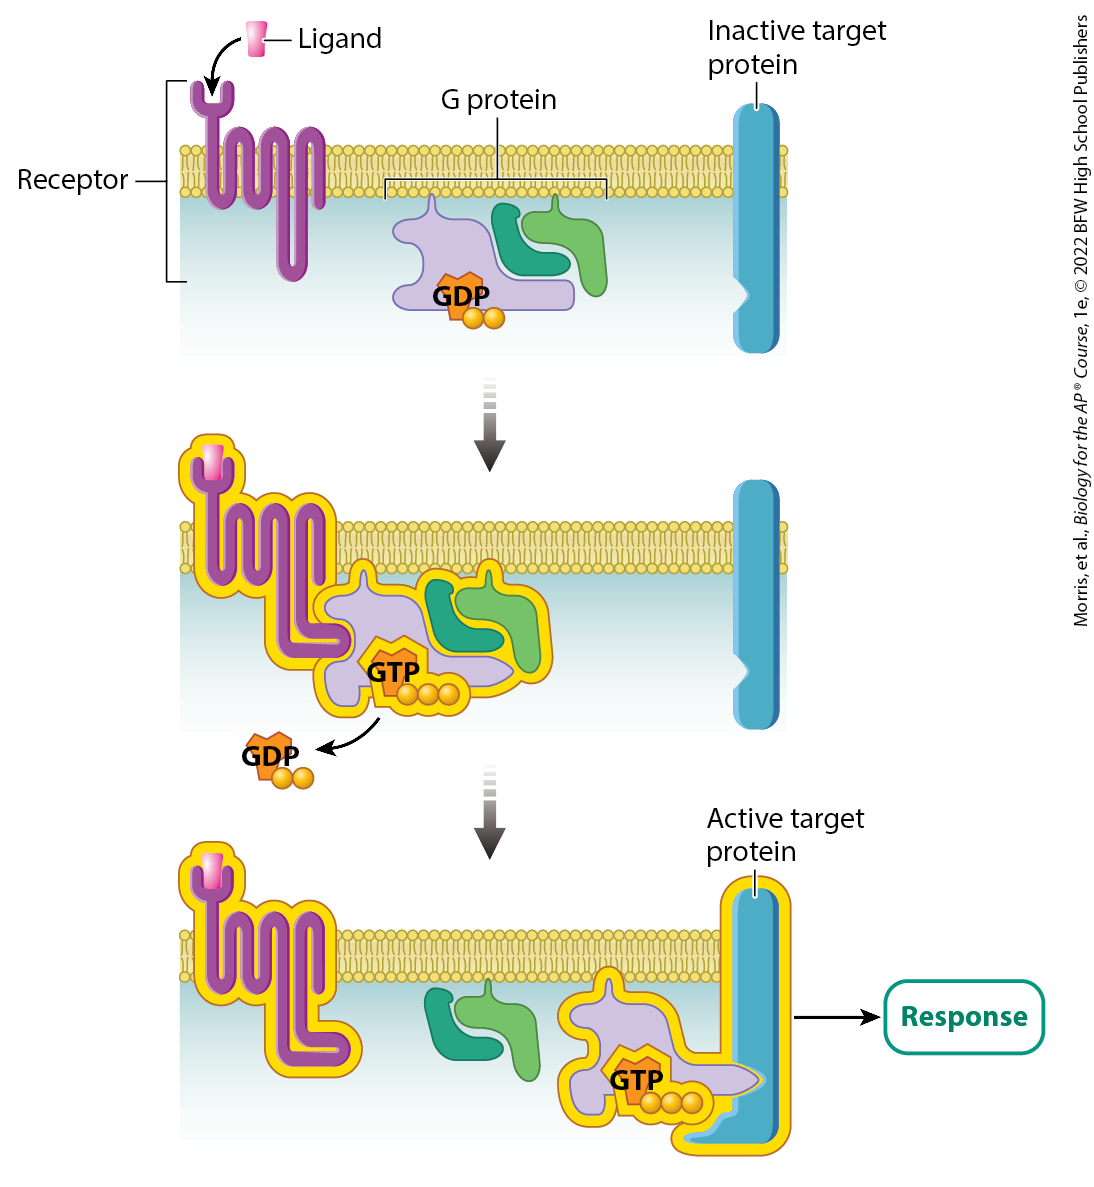 <p>when a signal binds to the extracellular part of the receptor protein (top), the G protein binds to the signal–receptor complex inside the cell (middle). As a result of binding to the complex, the G protein’s GDP is exchanged for GTP. The G protein then binds to and activates a target protein (bottom). The active target protein produces intracellular events, leading to a cellular response.</p>